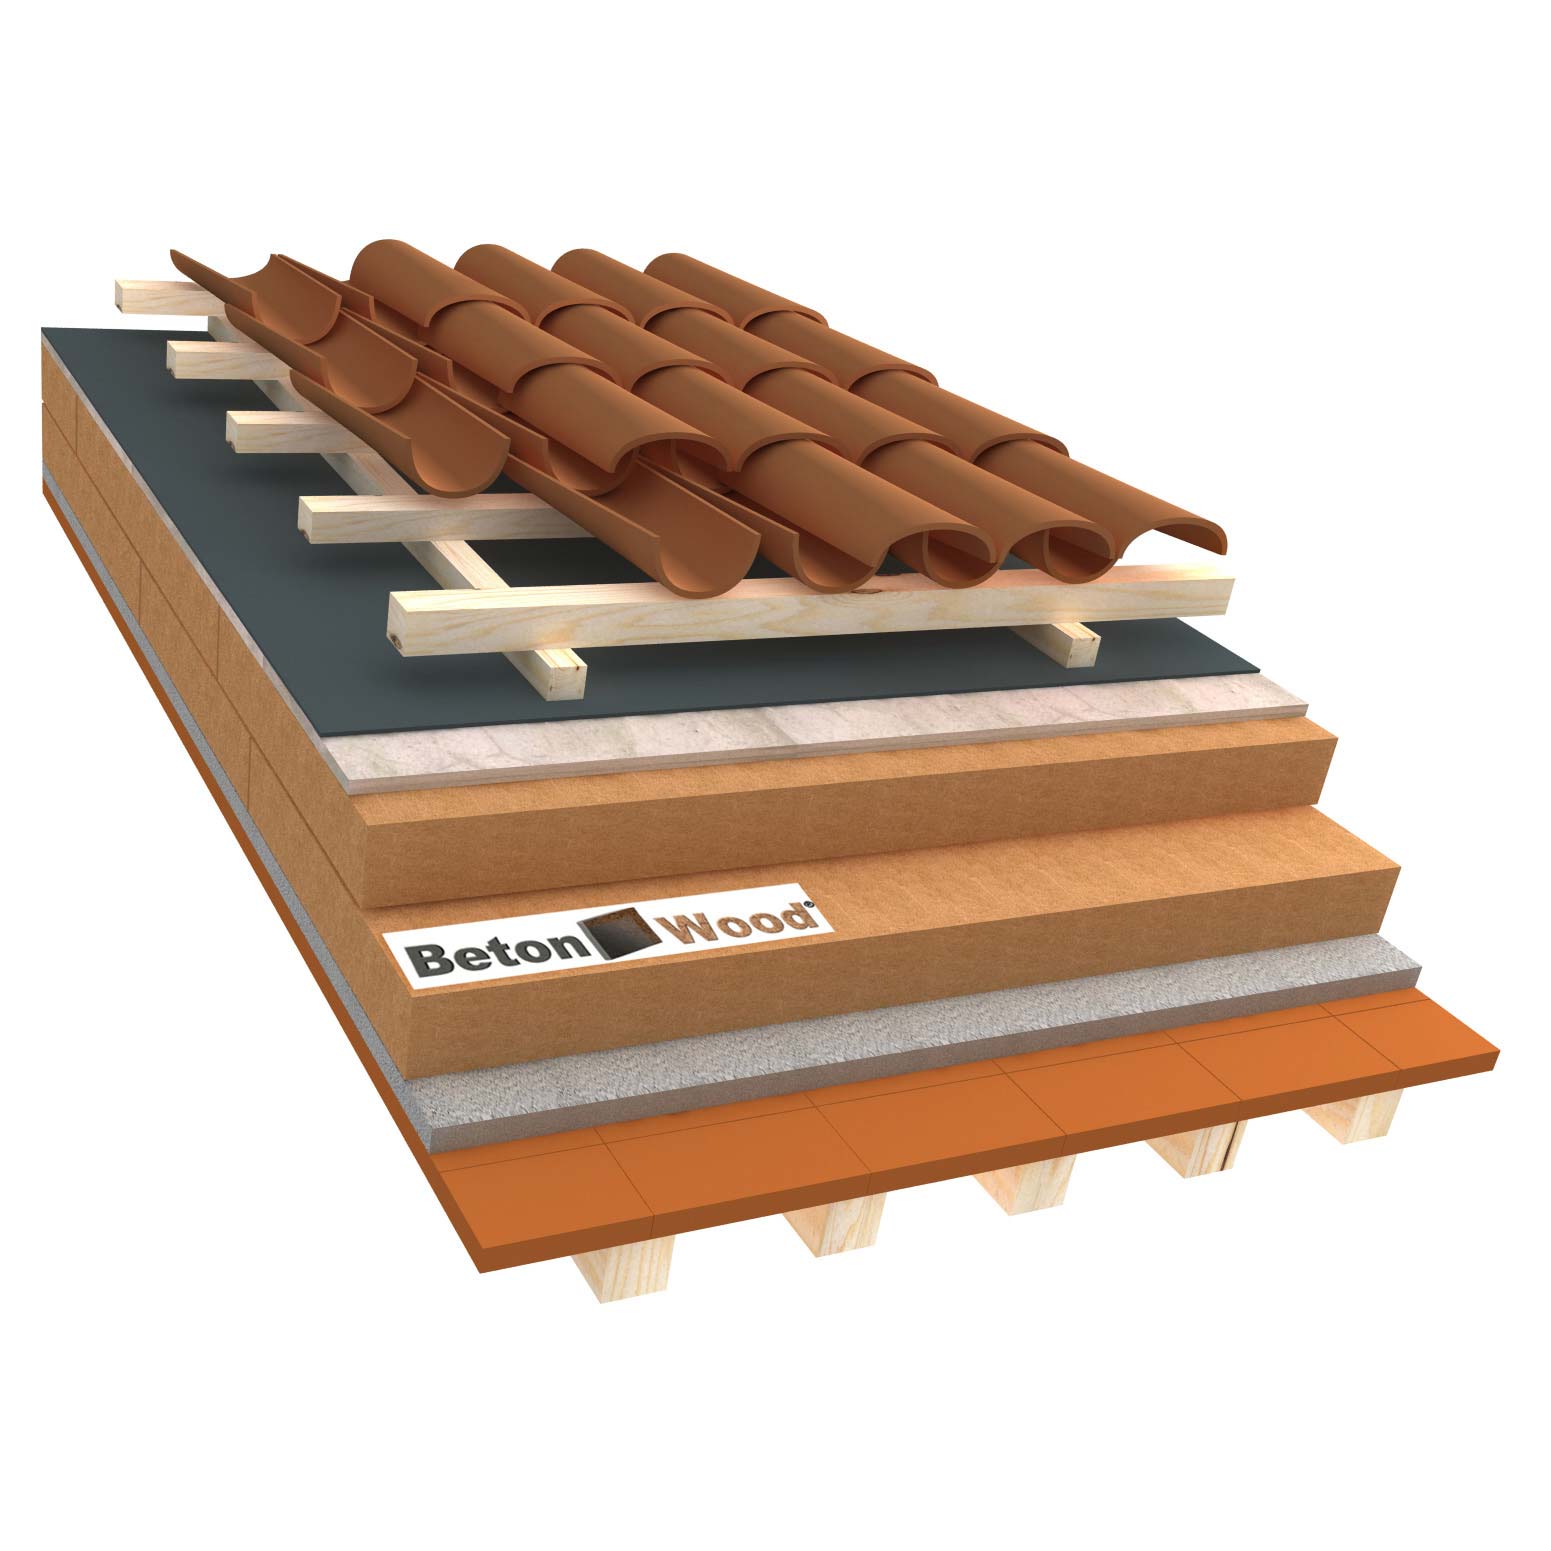 Ventilated roof with wood fiber Universal and cement bonded particle boards on terracotta tiles